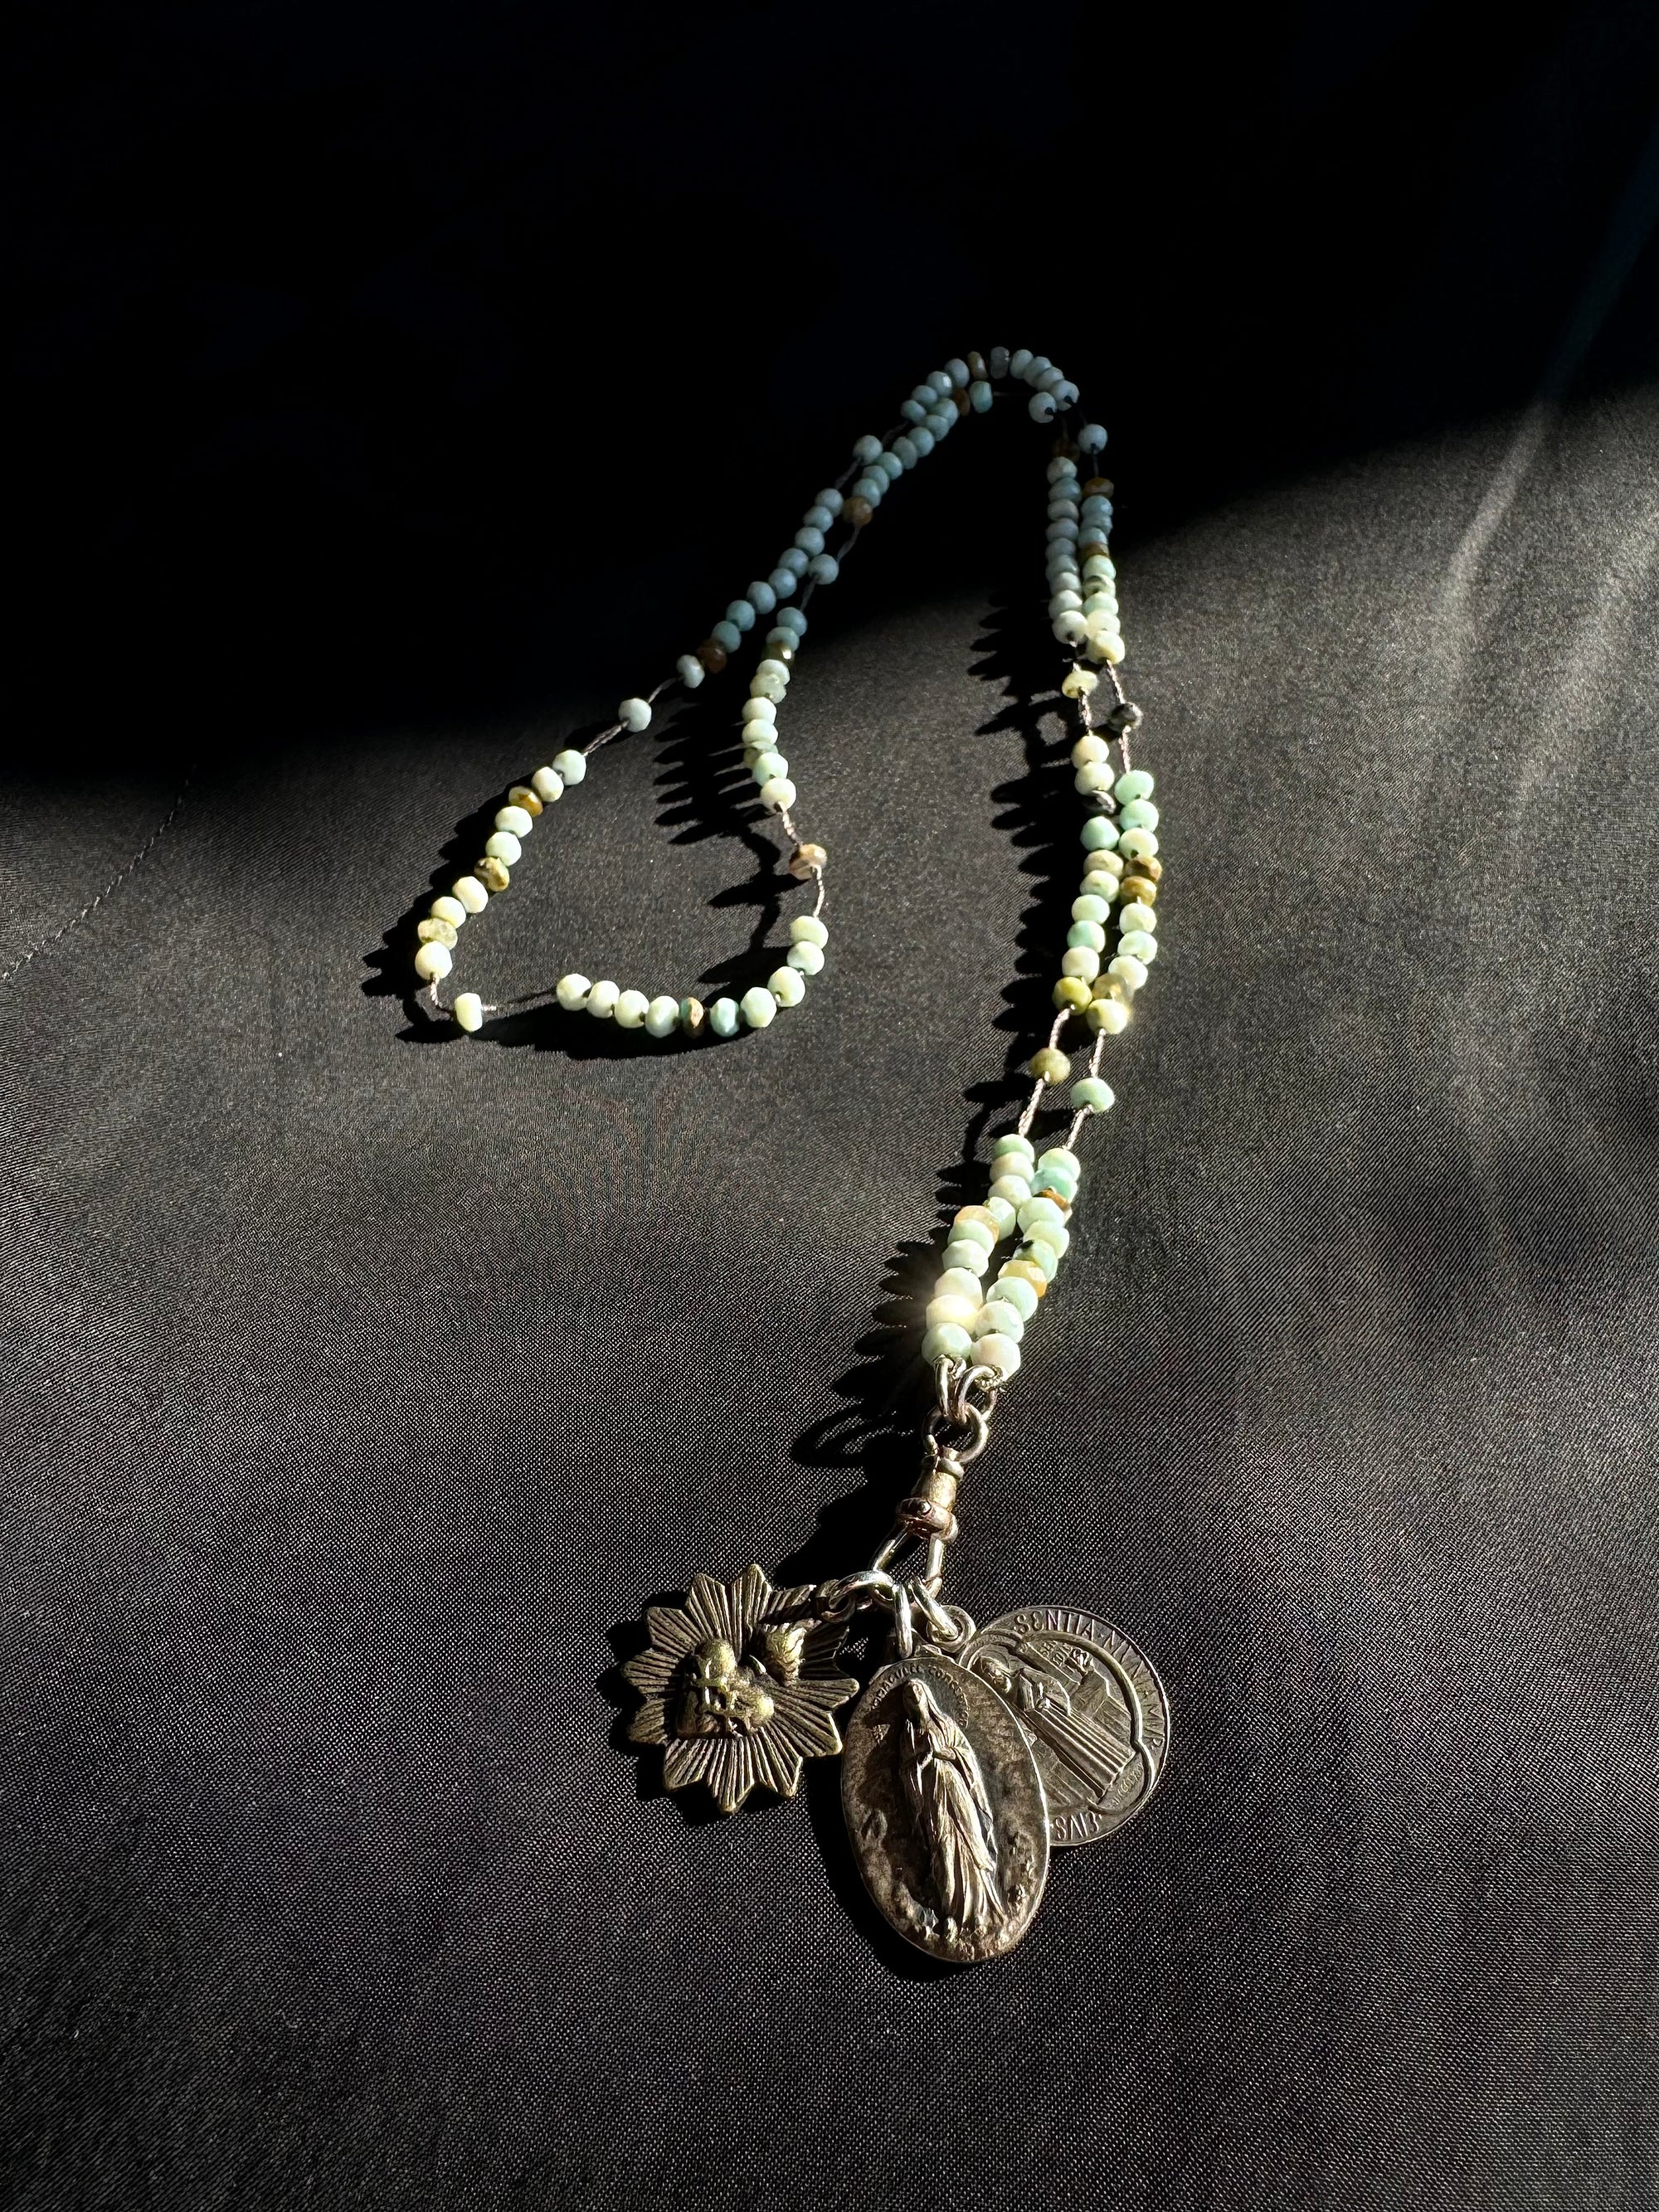 Peruvian Opal Rosary Necklace